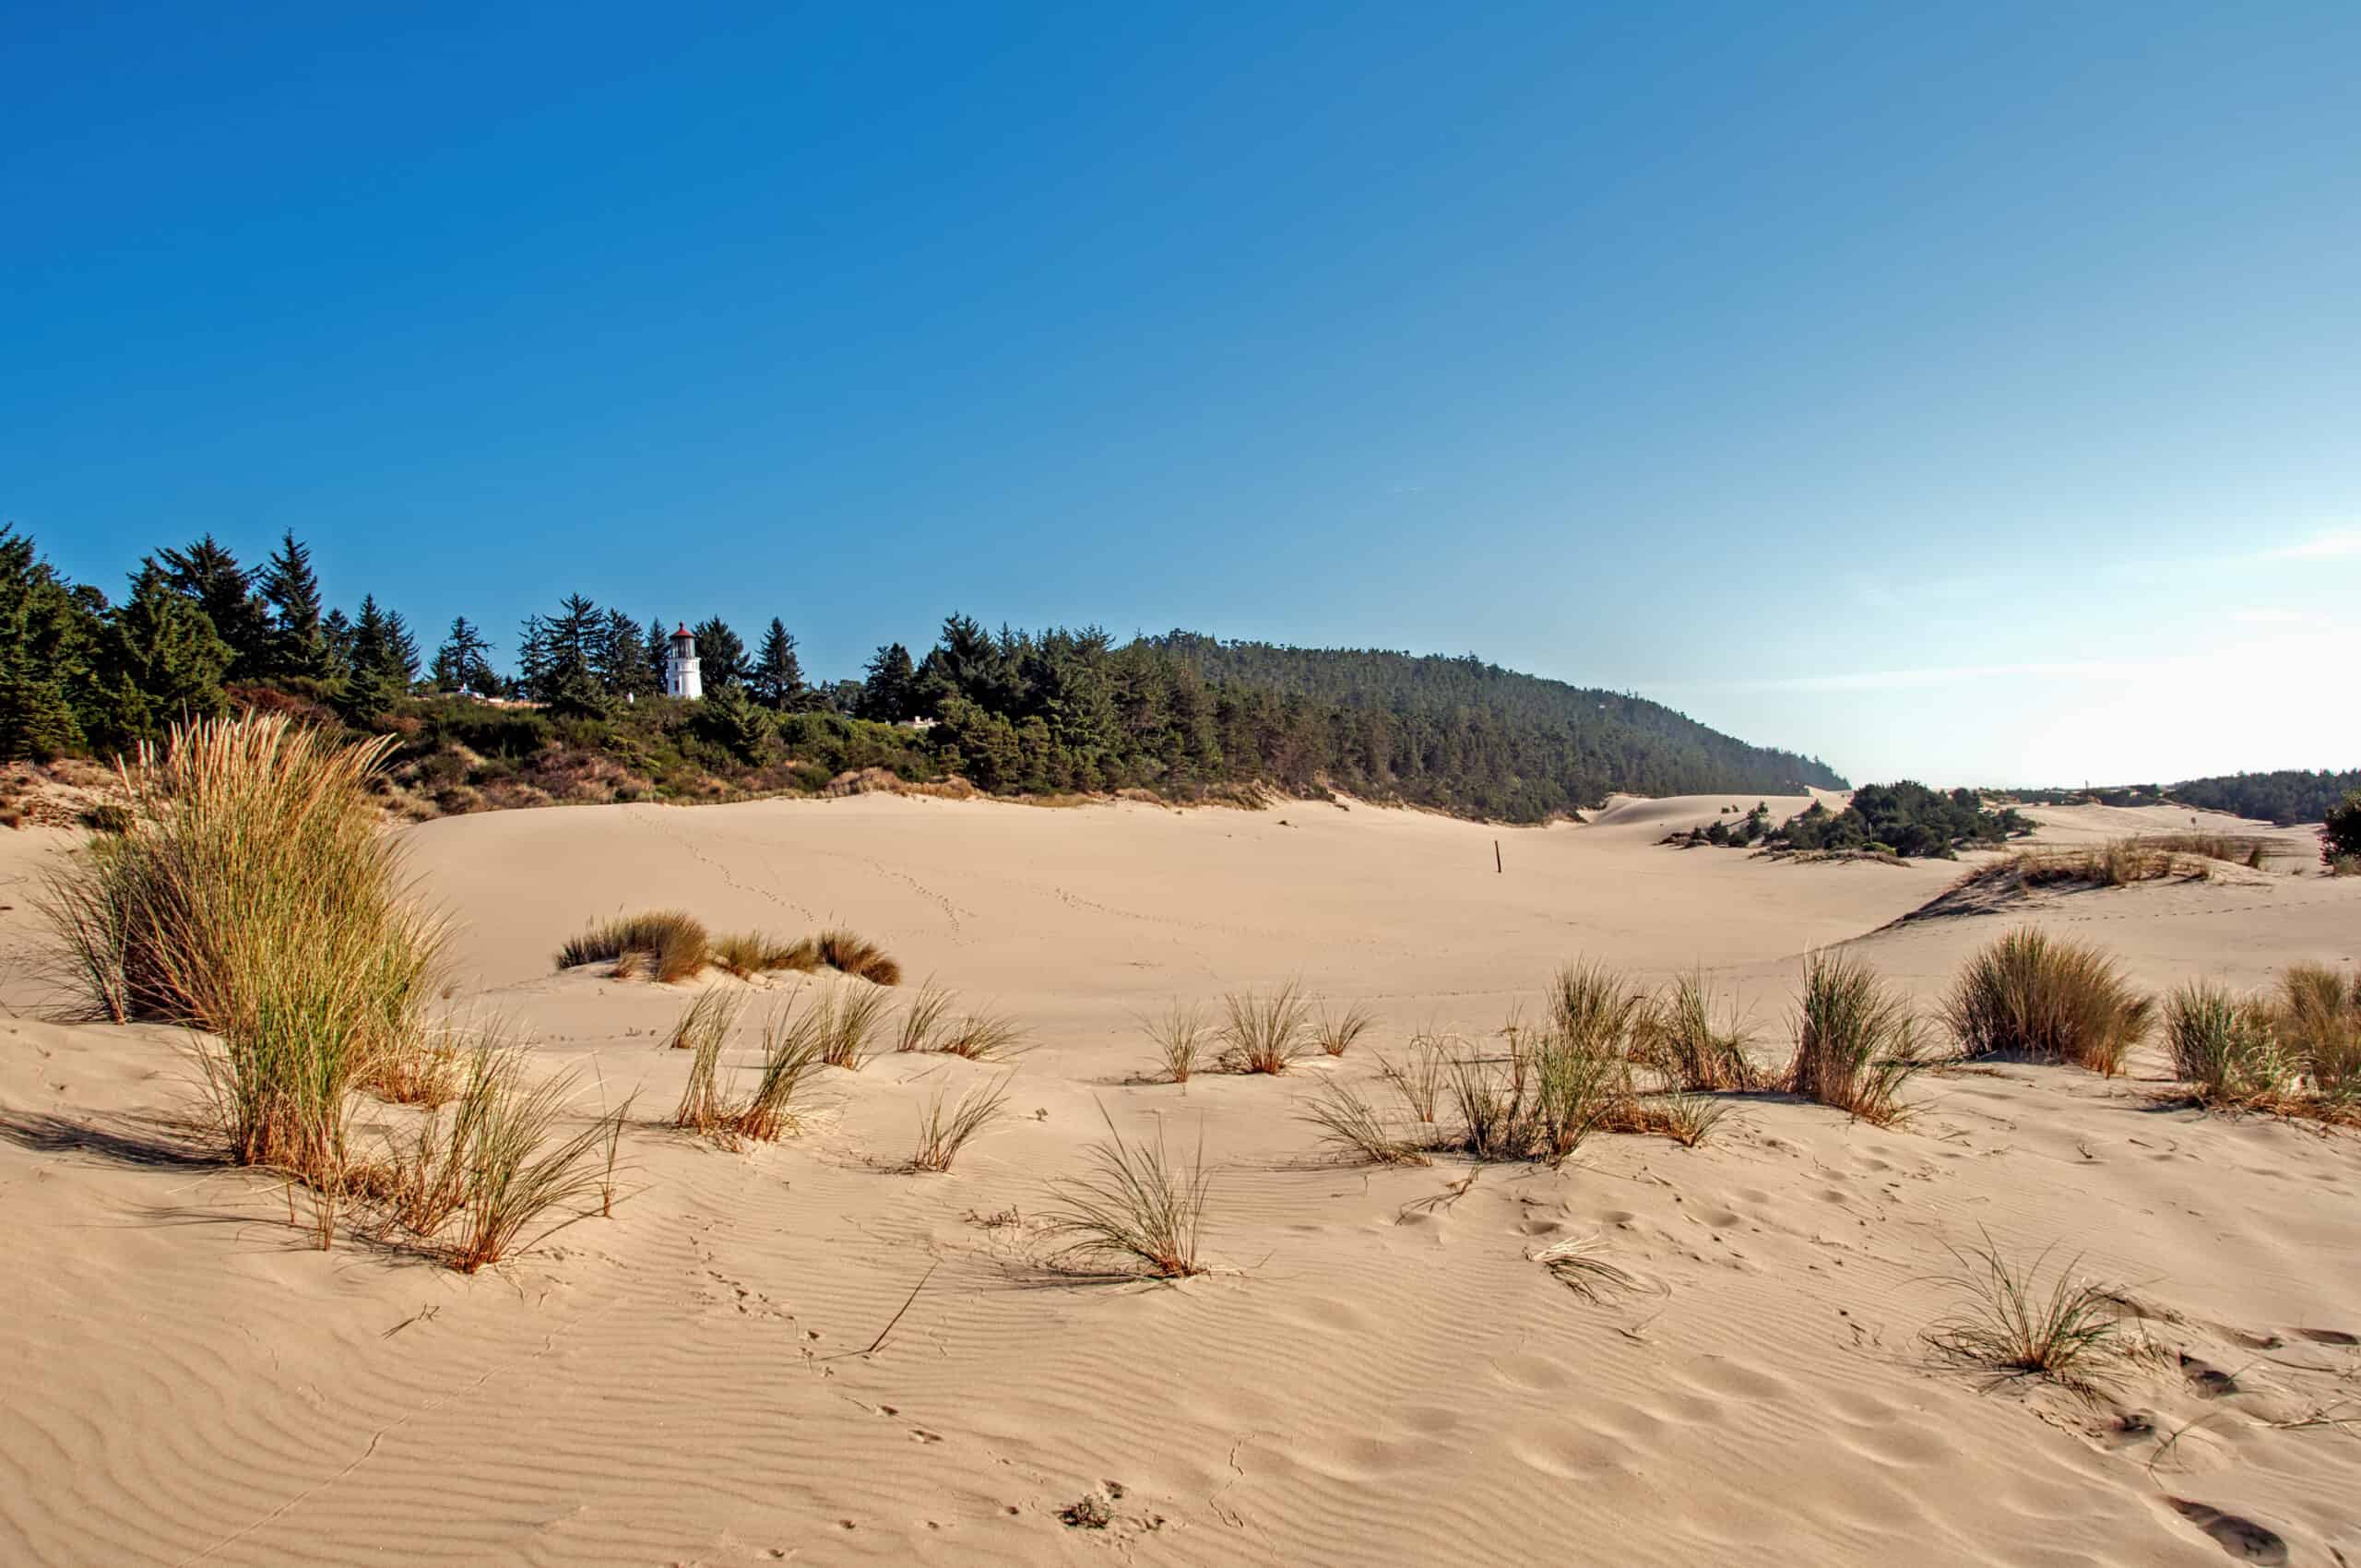 <p>This one-of-a-kind recreation area is on the Oregon coast between Florence and Coos Bay. The sandy area is a place to have fun. It is the largest coastal sand dunes in North America and one of the cool things Oregon is known for. The Oregon Dunes are over 100,000 years old and are part of the Siuslaw National Forest. The recreational area is perfect for hiking, camping, swimming, boating, paddling, and wildlife watching. This is truly a unique piece of Oregon and worth a visit.</p>